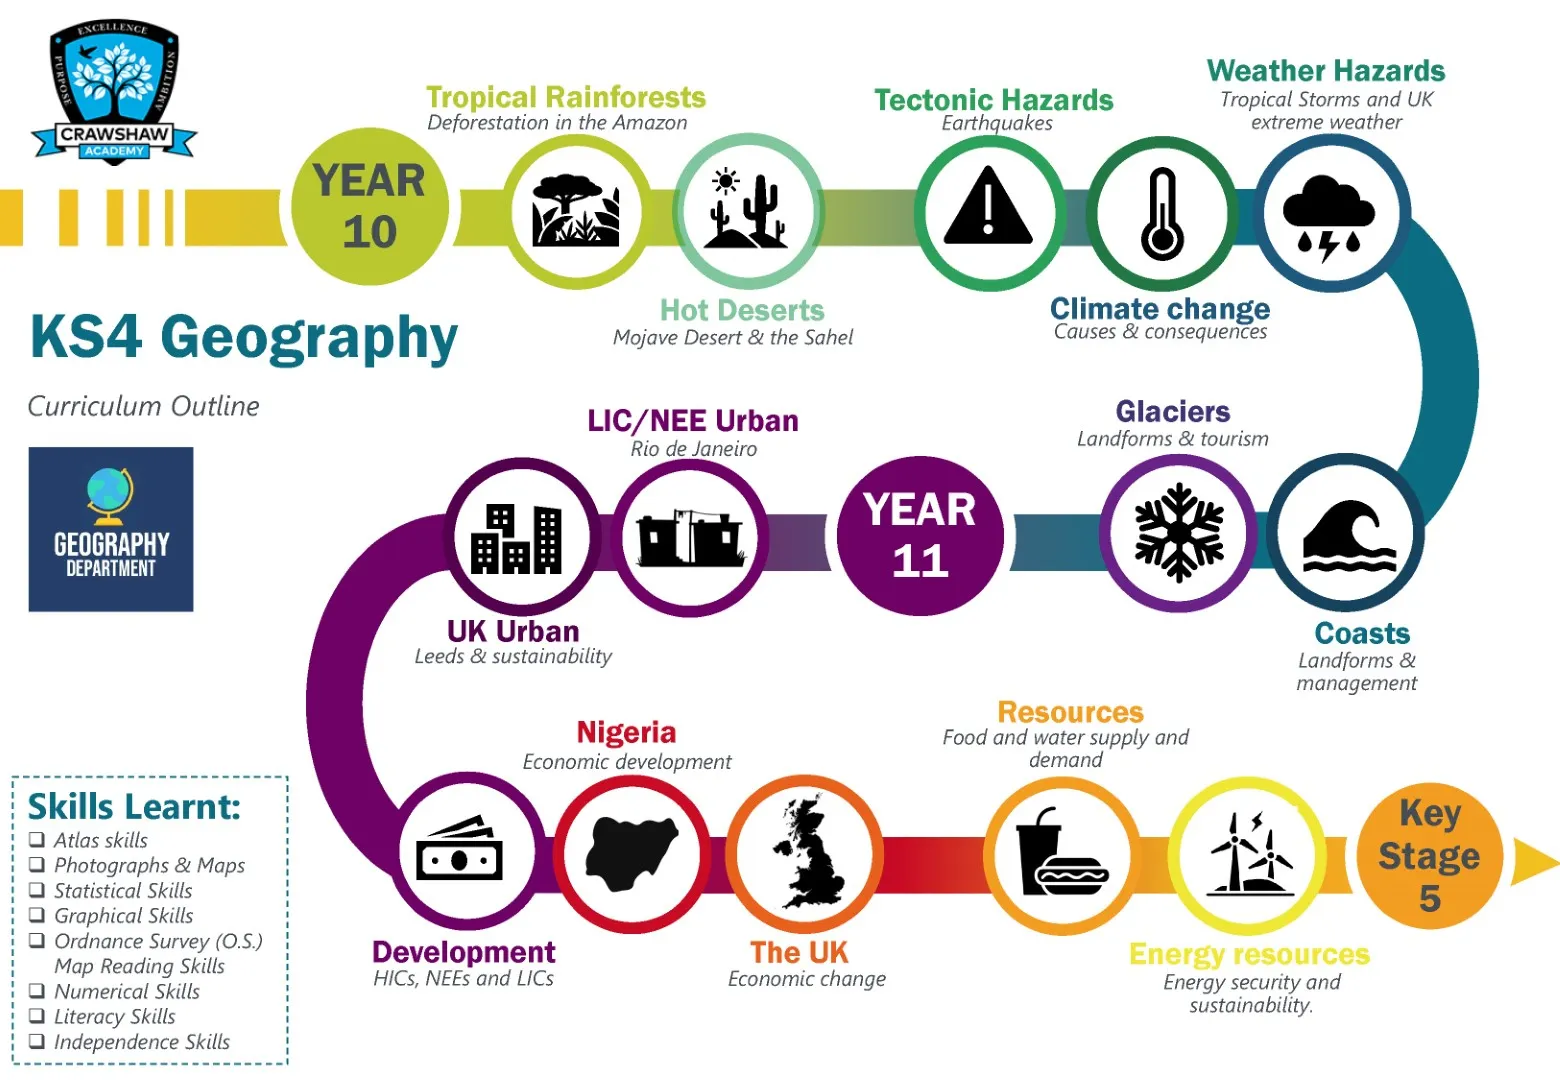 KS4 Geography overview